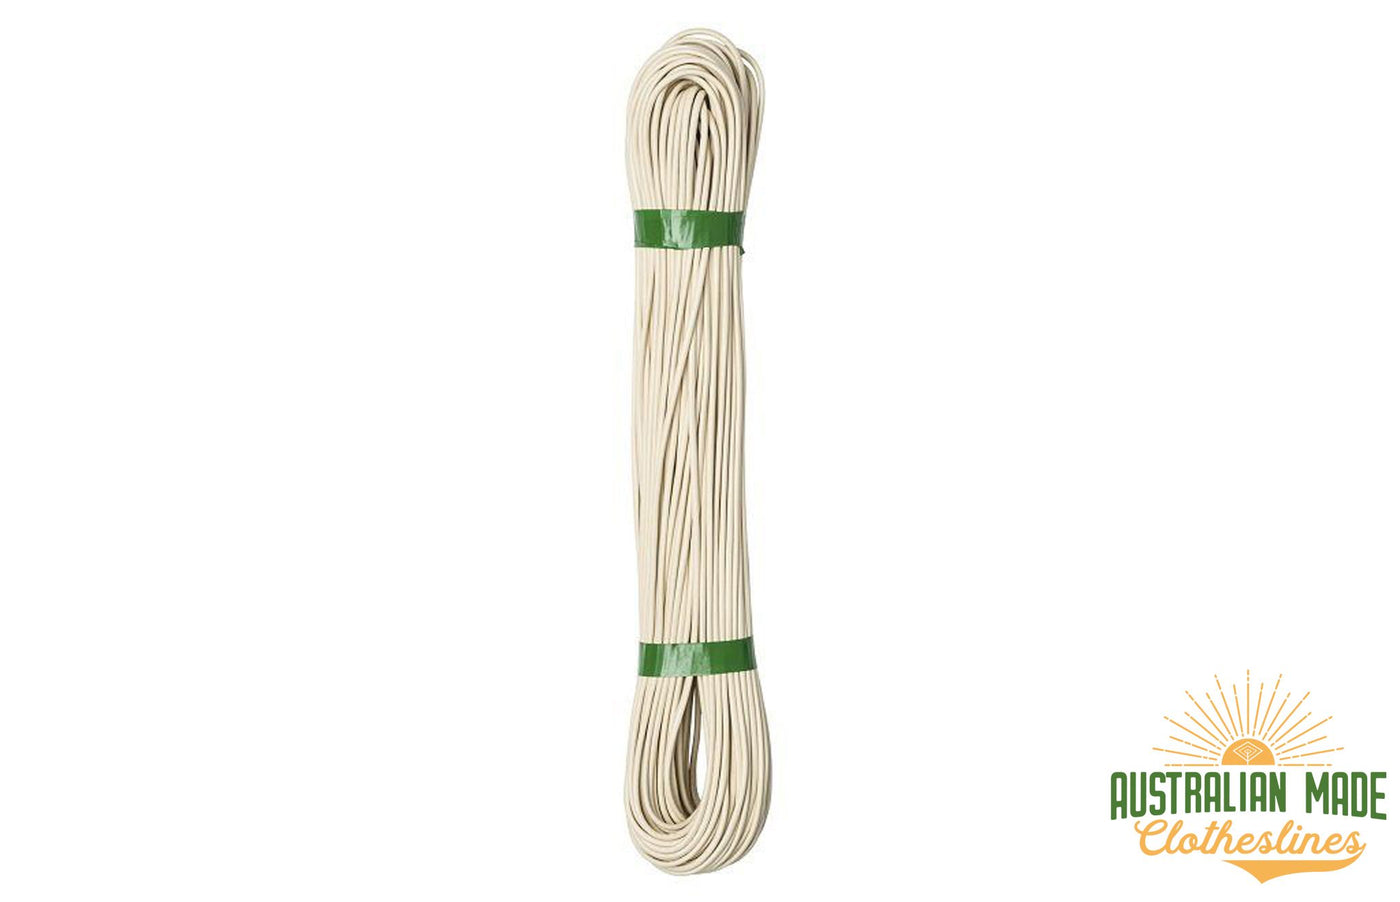 Austral 60m Clothesline Cord - Cream unwrapped - Australian Made Clotheslines